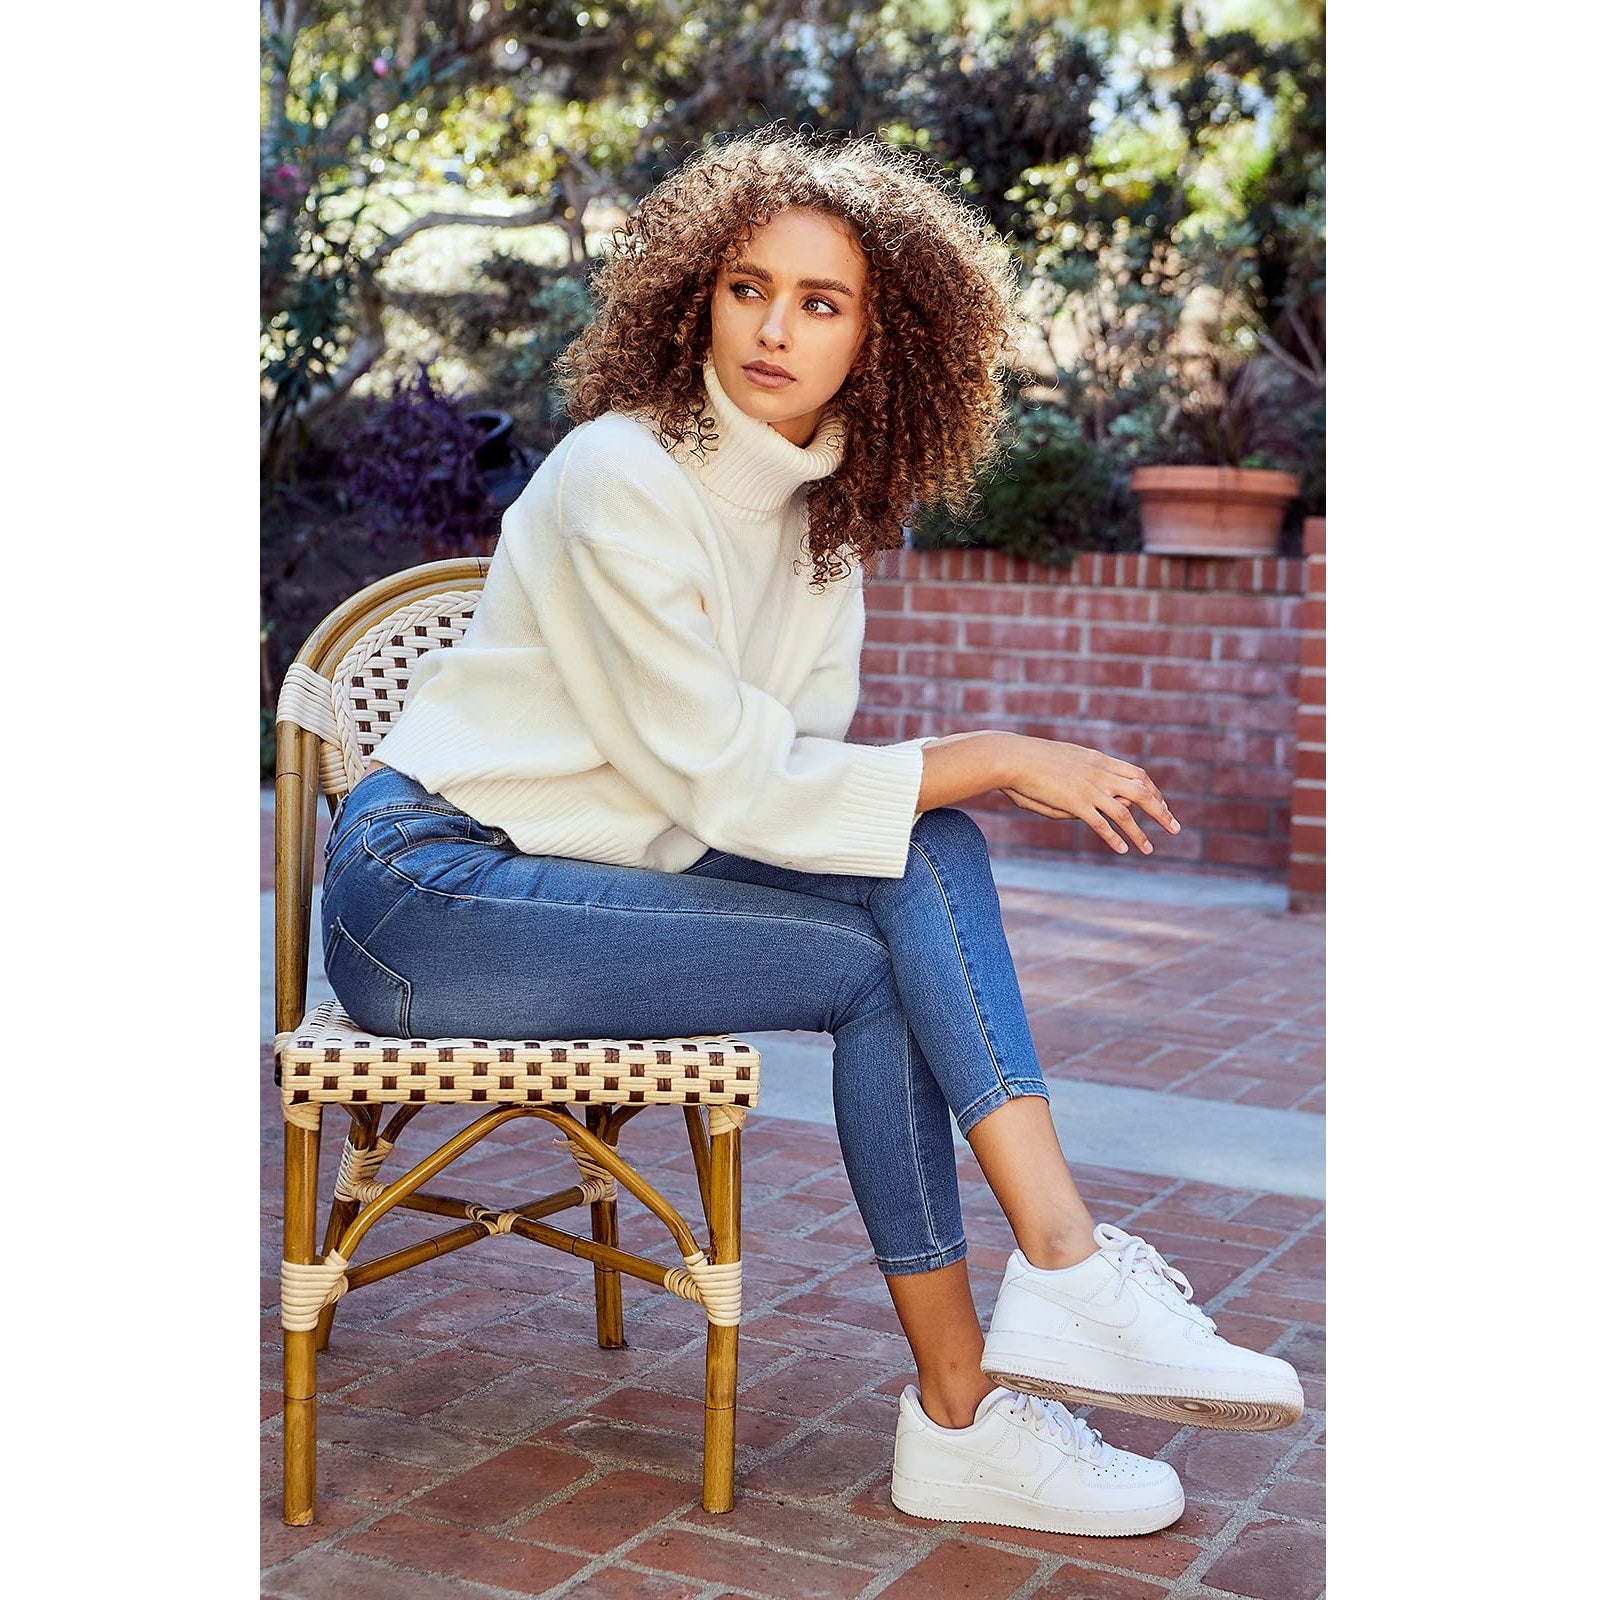 A woman sitting on a chair wearing a white pullover and skinny jeans